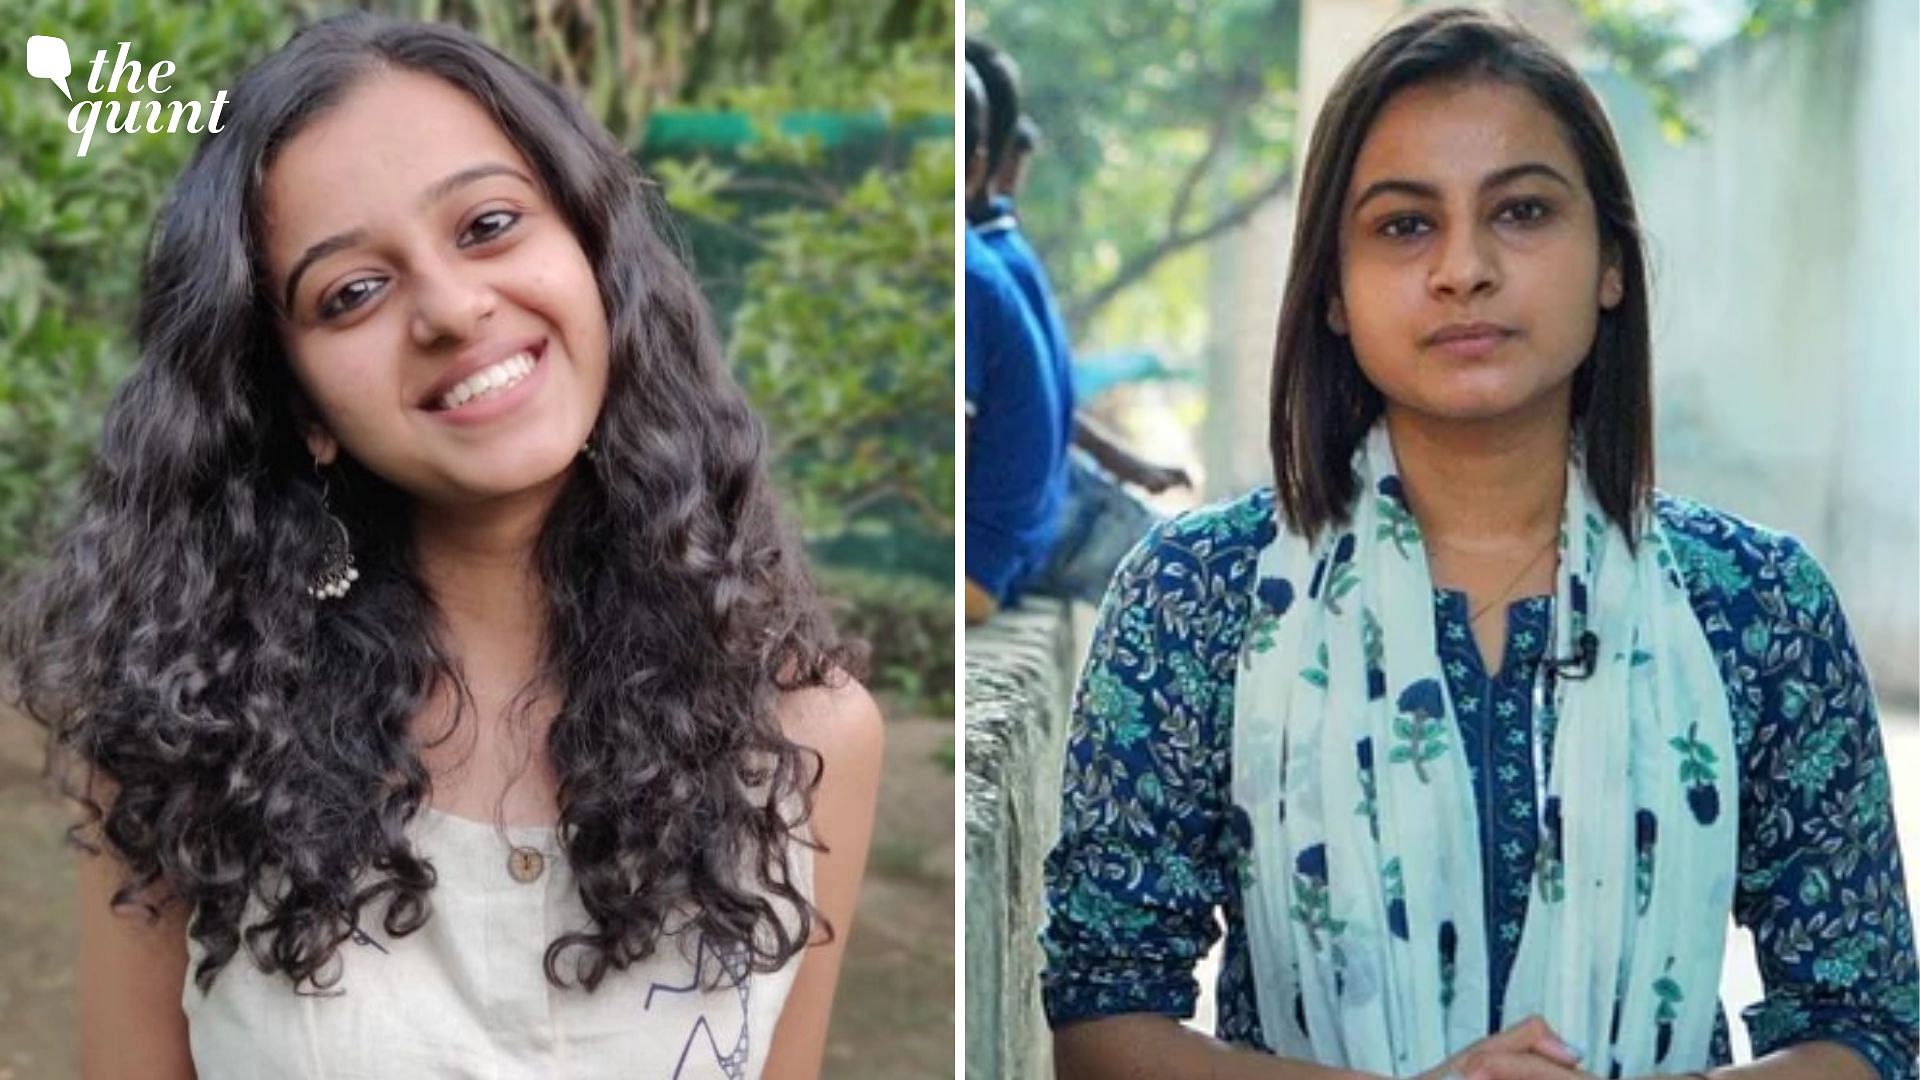 <div class="paragraphs"><p>We are happy to announce that&nbsp;<strong>The Quint</strong>’s Sadhika Tiwari and Mythreyee Ramesh have received an award and a jury citation respectively for the prestigious <a href="https://www.thequint.com/news/india/the-quints-somya-lakhani-wins-laadli-award-saadhika-gets-jury-citation#read-more">Laadli Media</a> and Advertising Award for Gender Sensitivity 2021 (Northern).</p></div>